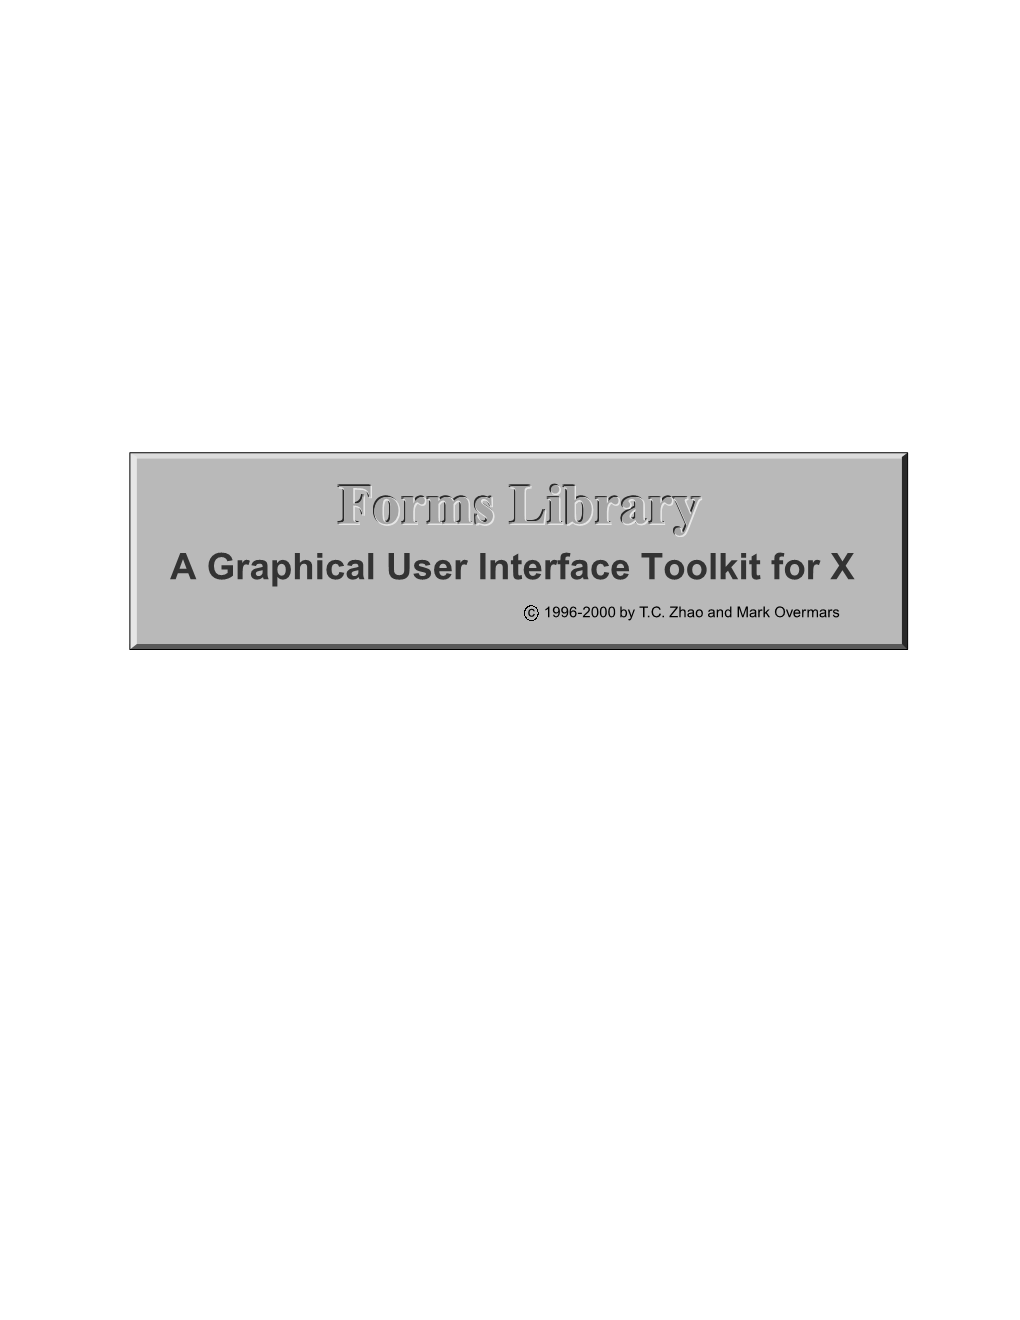 Forms Librarylibrary a Graphical User Interface Toolkit for X